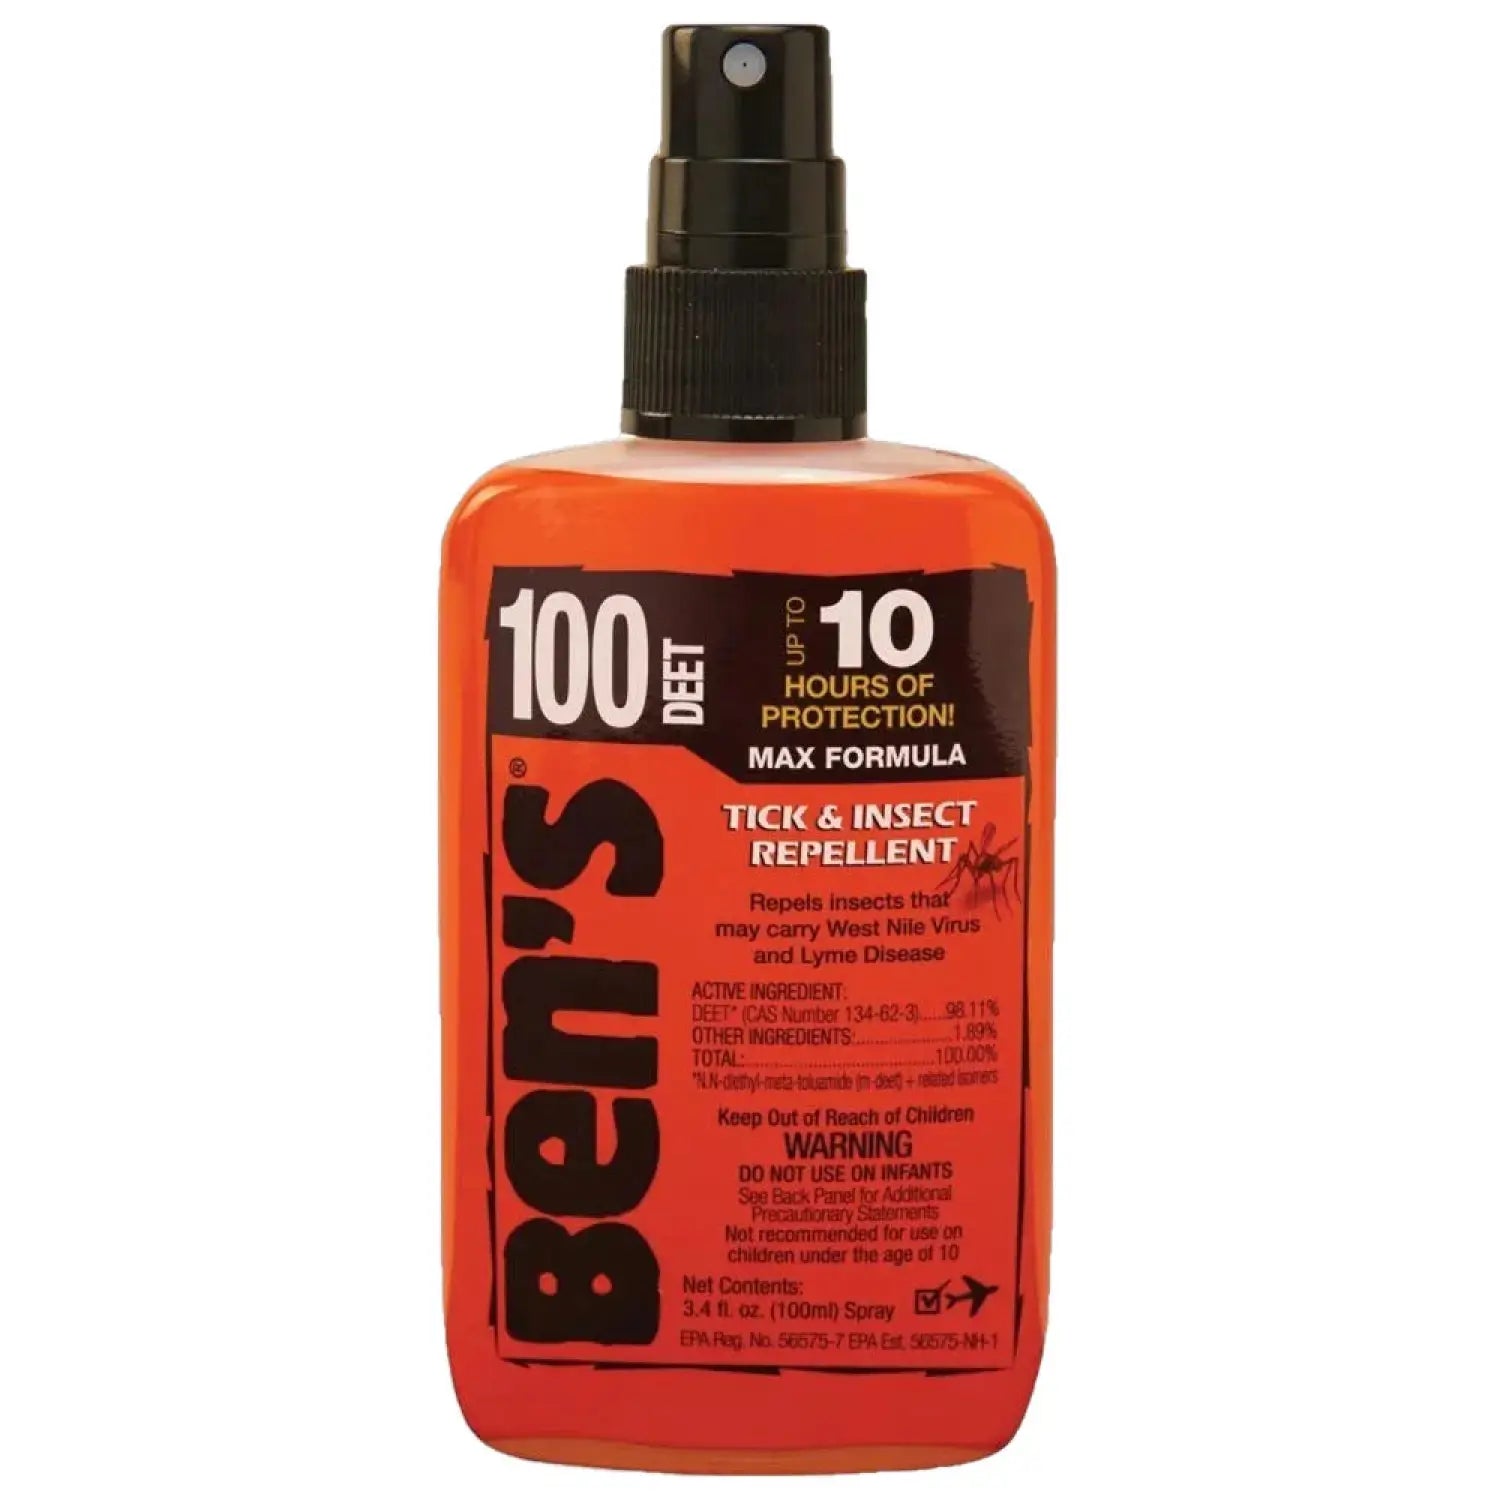 Ben's Max Insect Repellent, front view of bottle